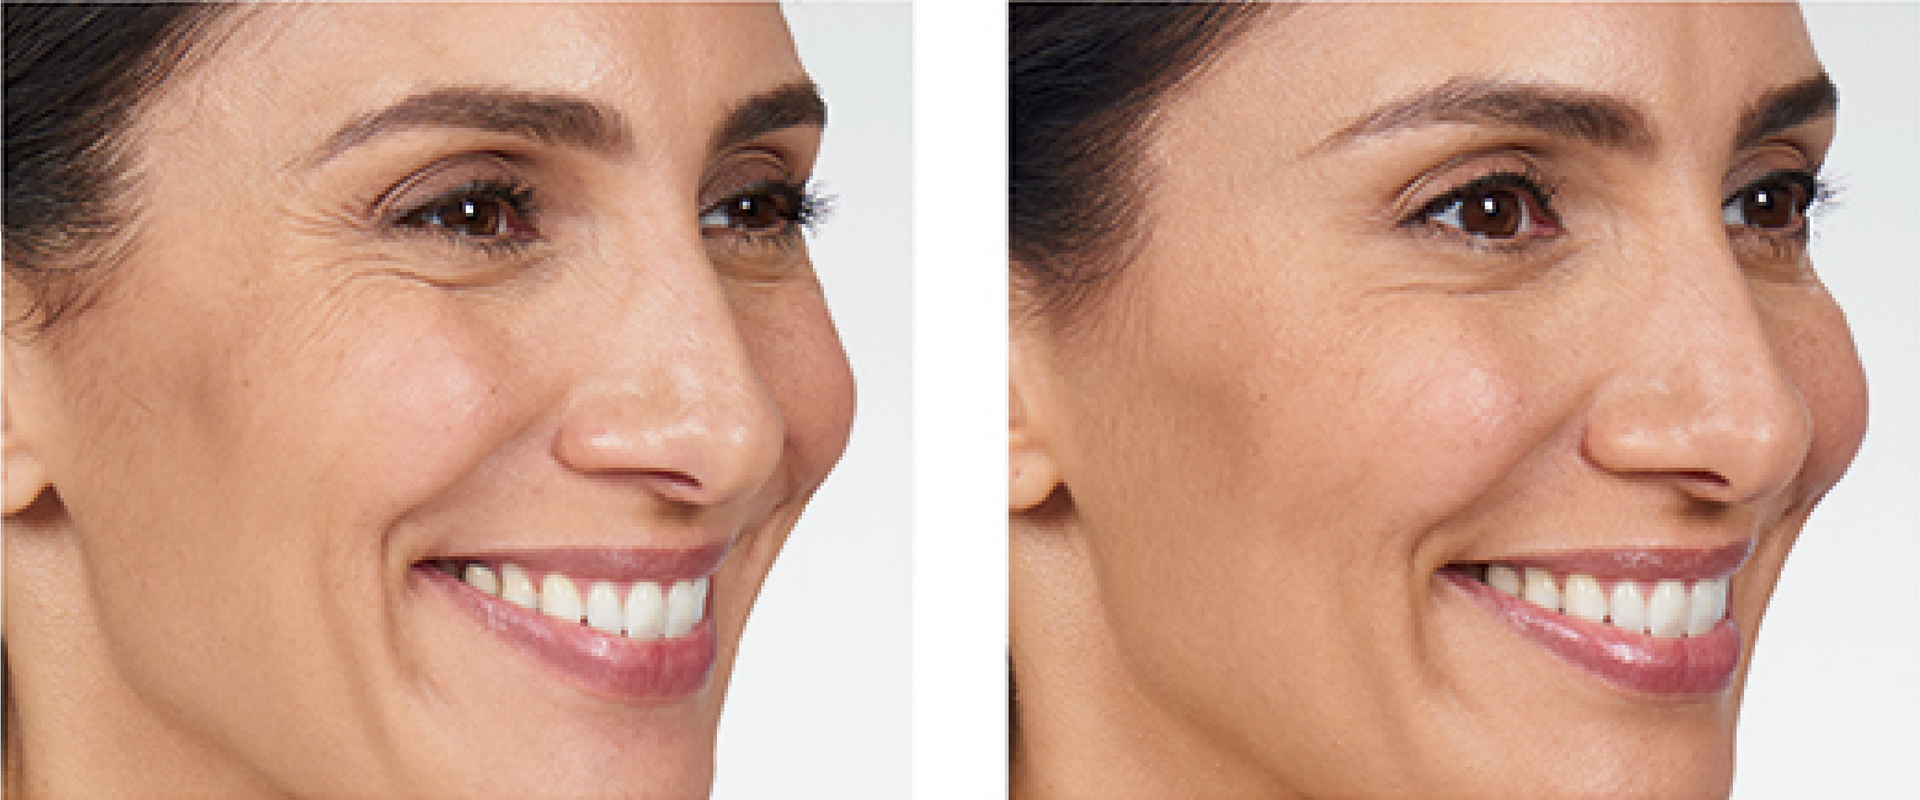 real patient before and after treatment with Botox injection